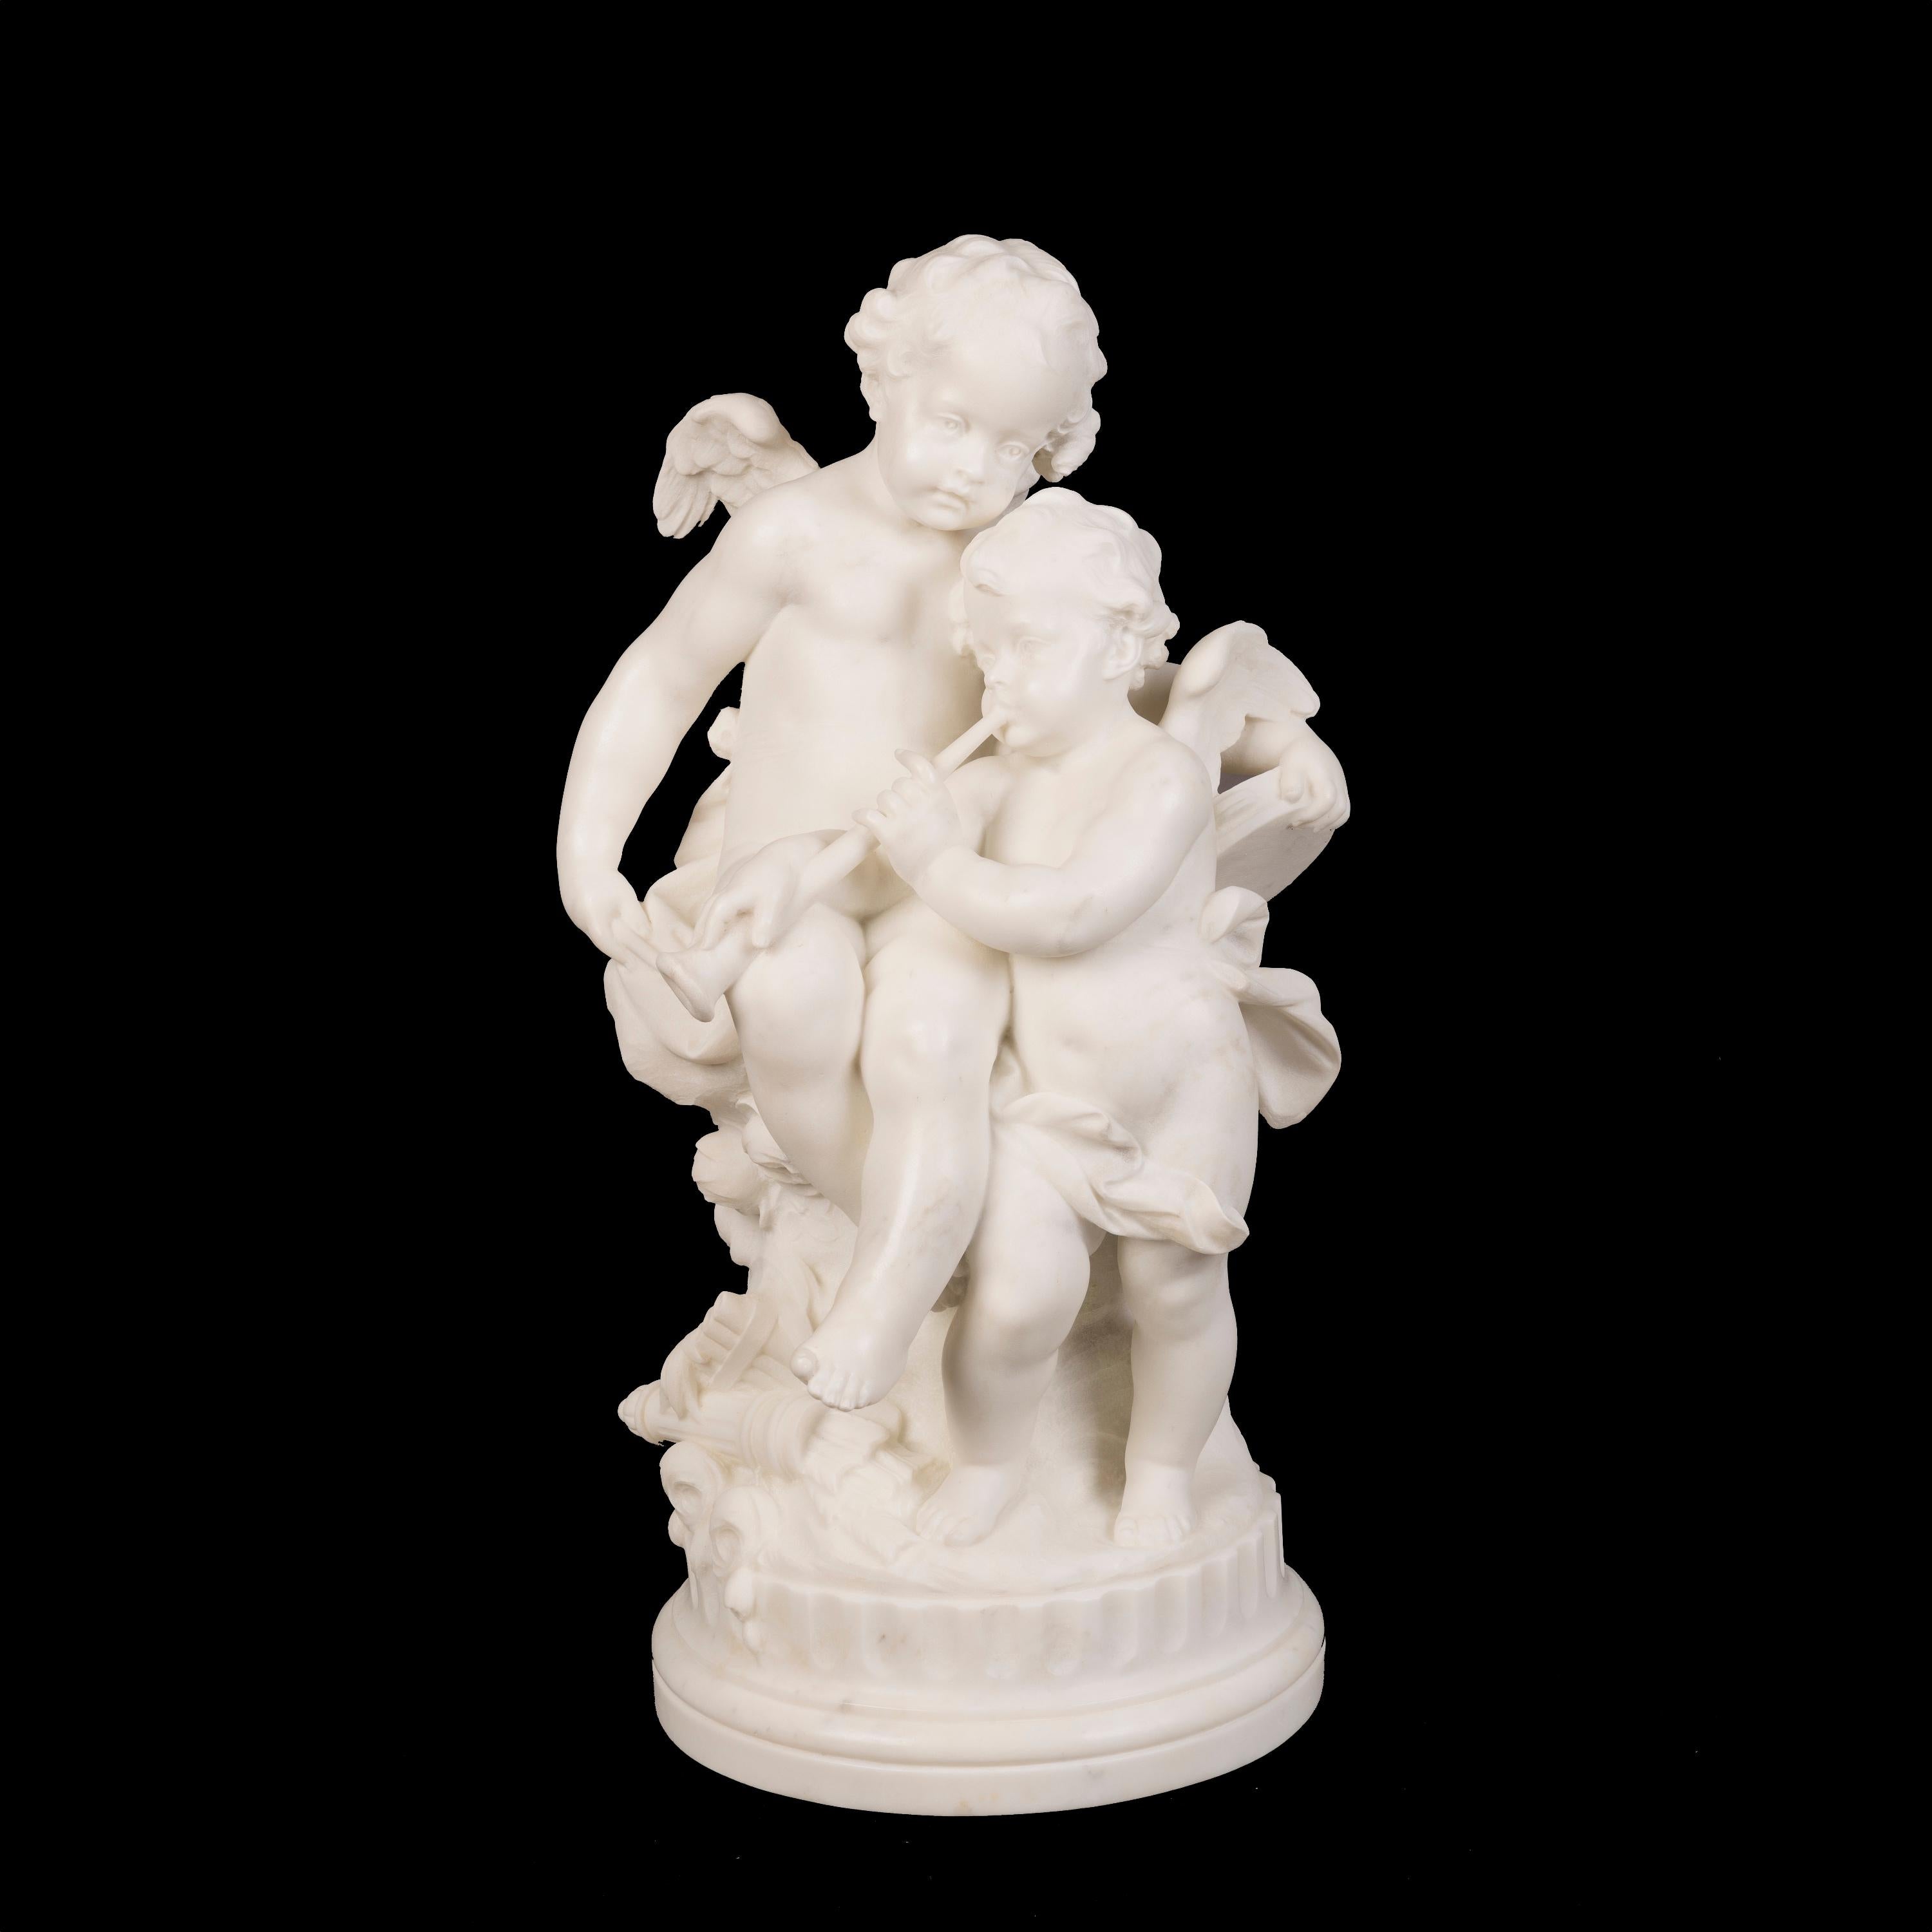 Allegories of the Greek Gods Eros & Erato
An Italian Carved Sculptural Group

Carved from a single block of Carrara marble, the winged putti cavorting together, one playing a trumpet and the other a tambourine. With a pan flute at their feet and